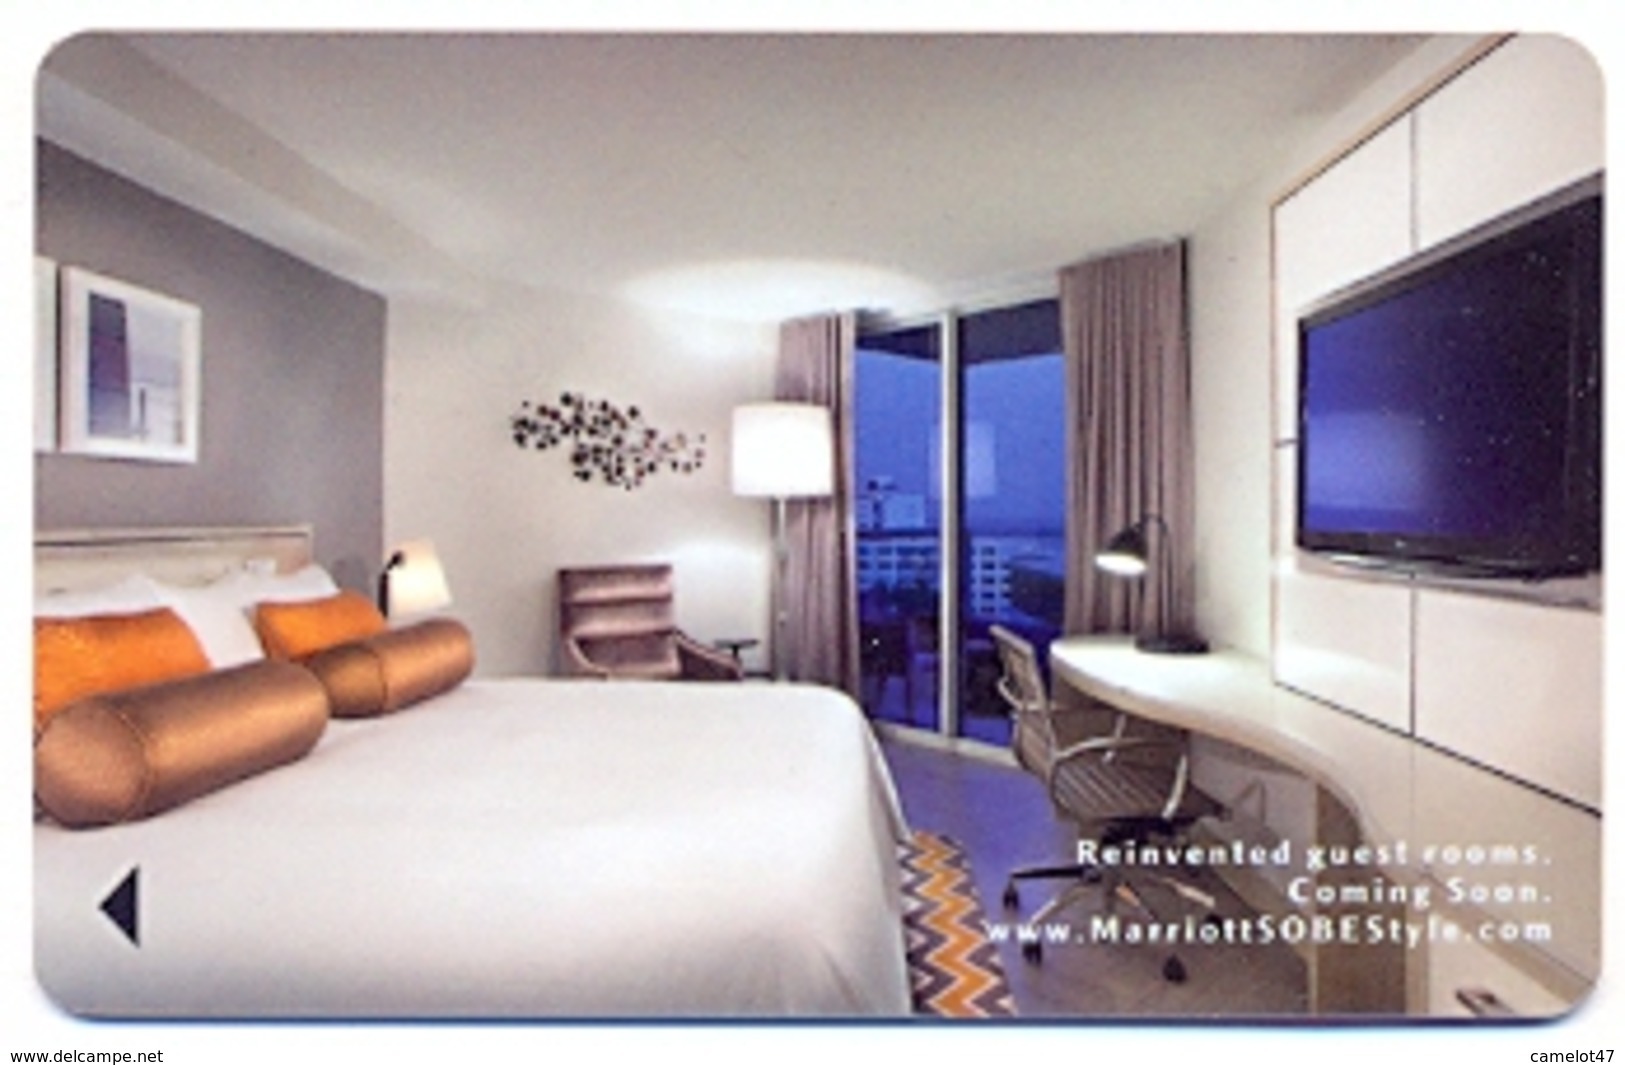 Marriot Hotels & Resorts, Used Magnetic Hotel Room Key Card # Marriot-151 - Hotel Keycards